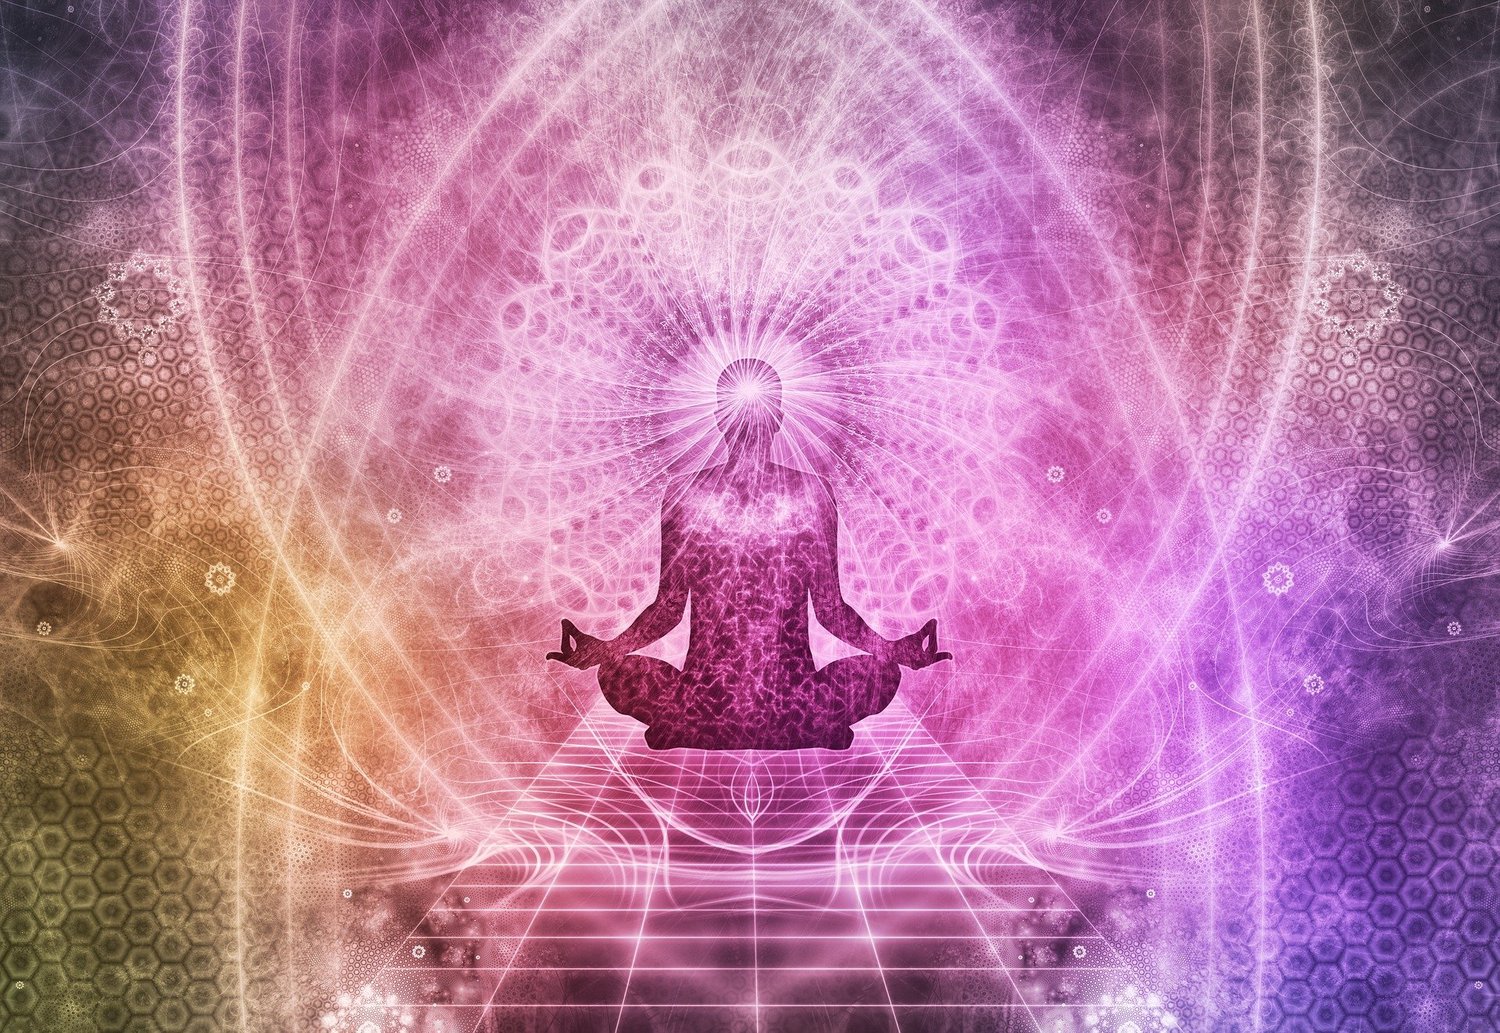 creative collage image of person in meditation surrounded by energy